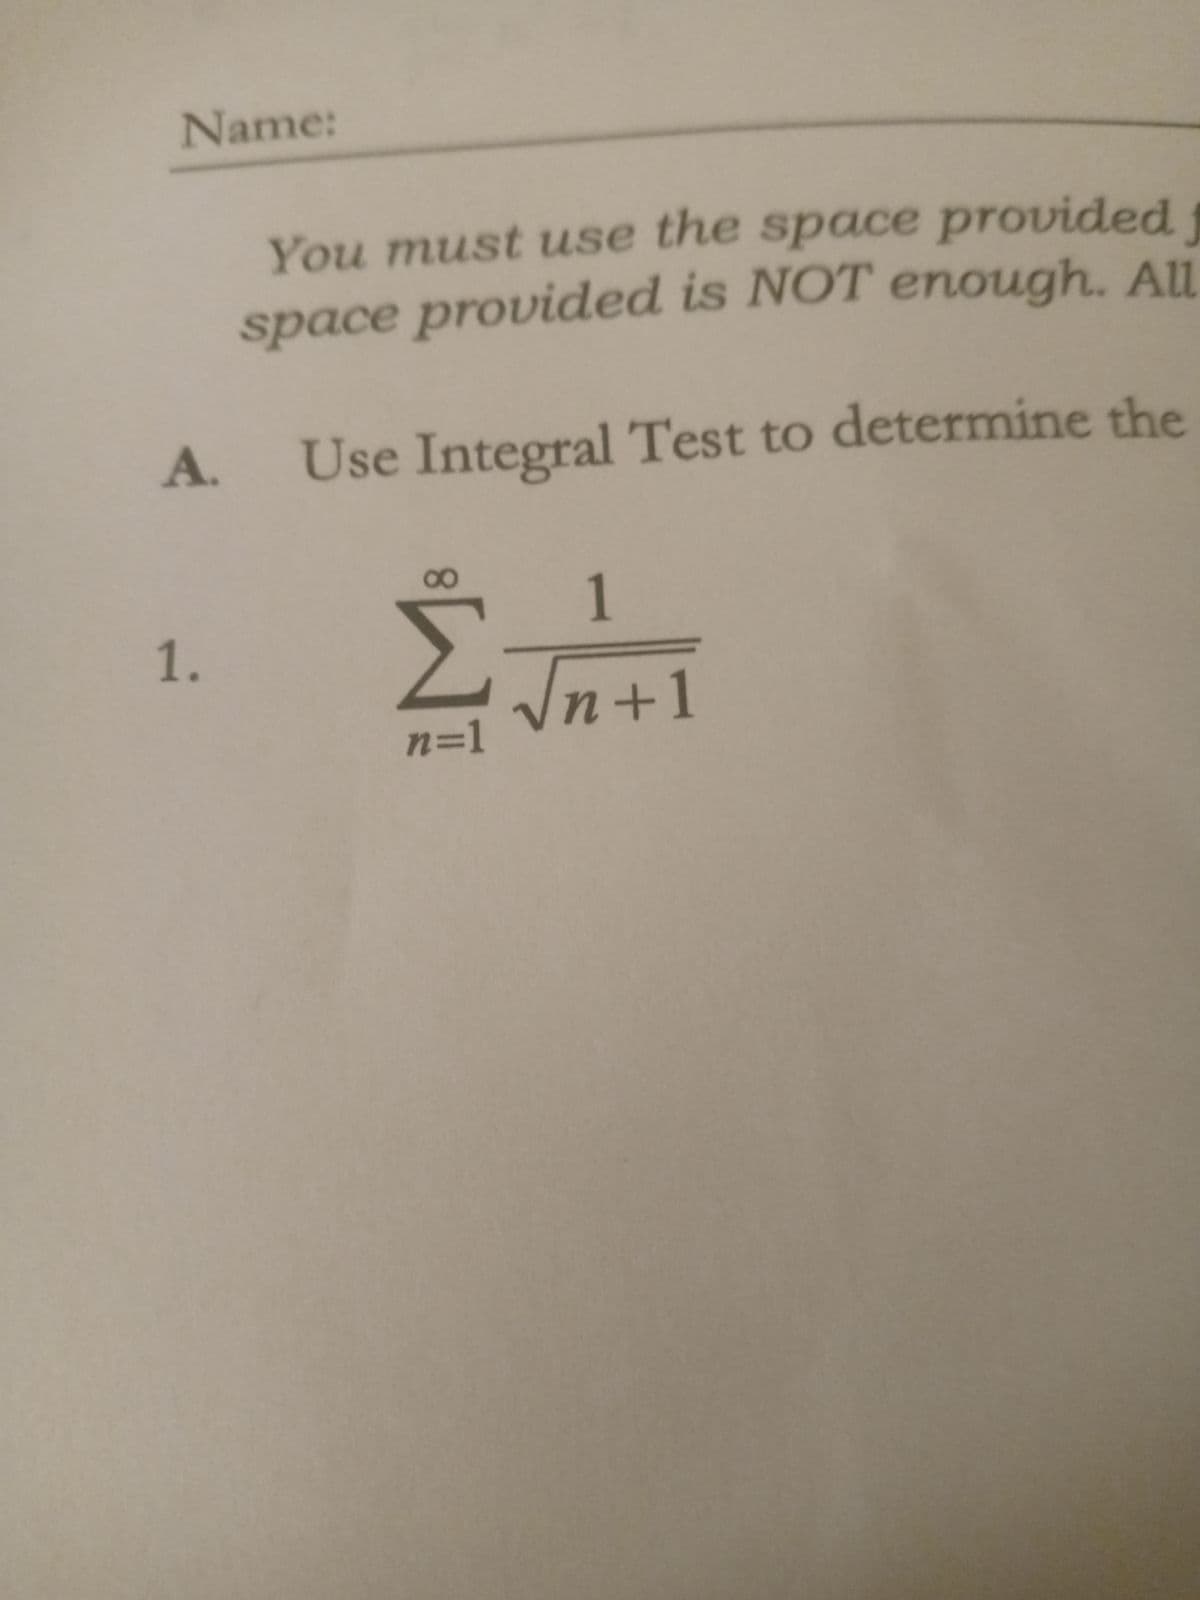 Name:
You must use the space provided f
space provided is NOT enough. All
A. Use Integral Test to determine the
1.
8
1
—₁√√n+1